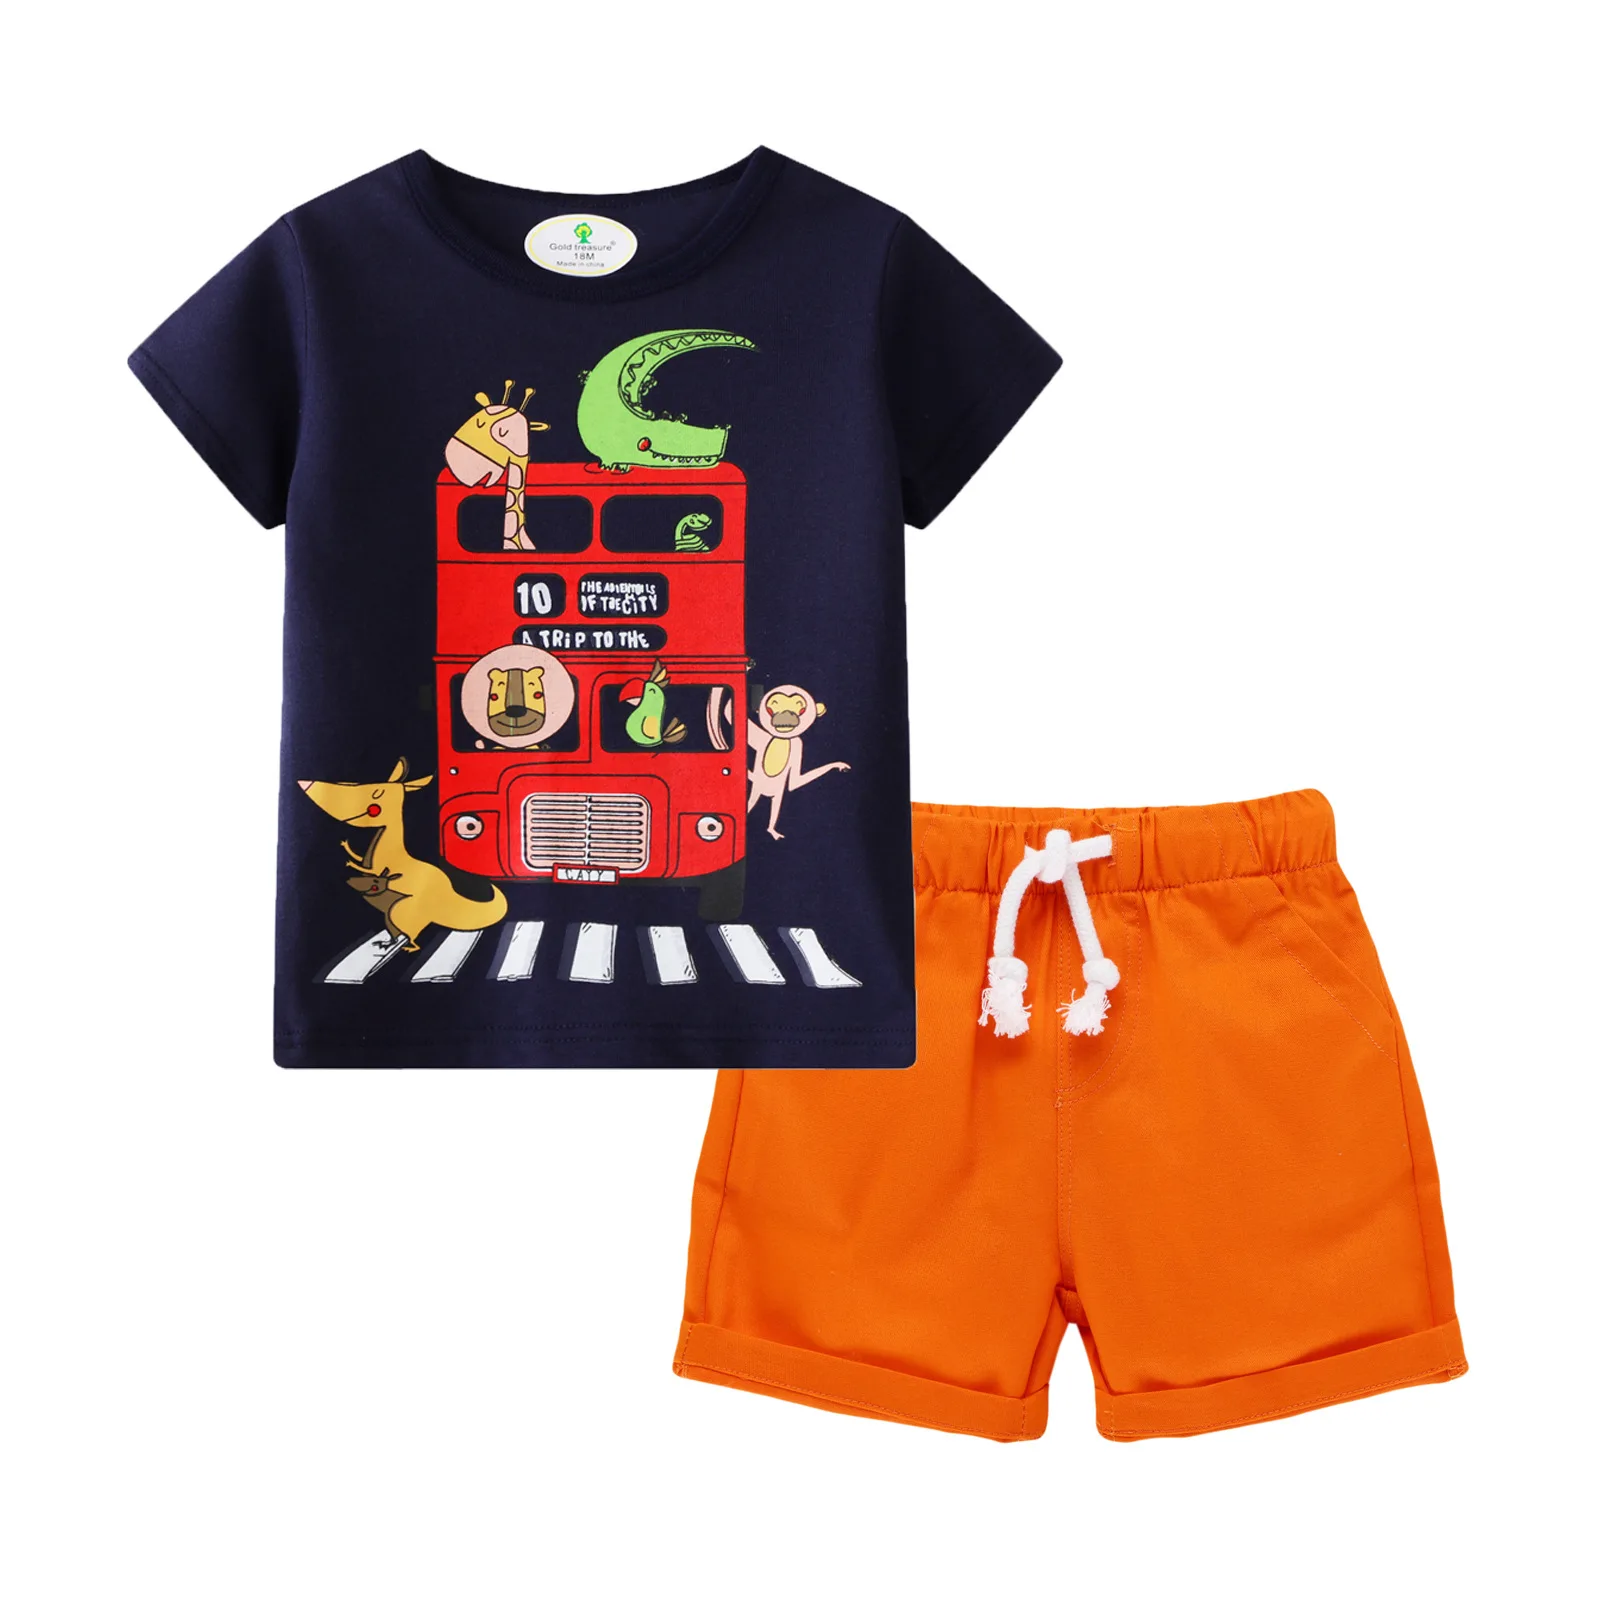 

European style children's clothing Summer Boys' pants cartoon handsome two-piece short sleeve T-shirt boys' clothing sets, Pic shows